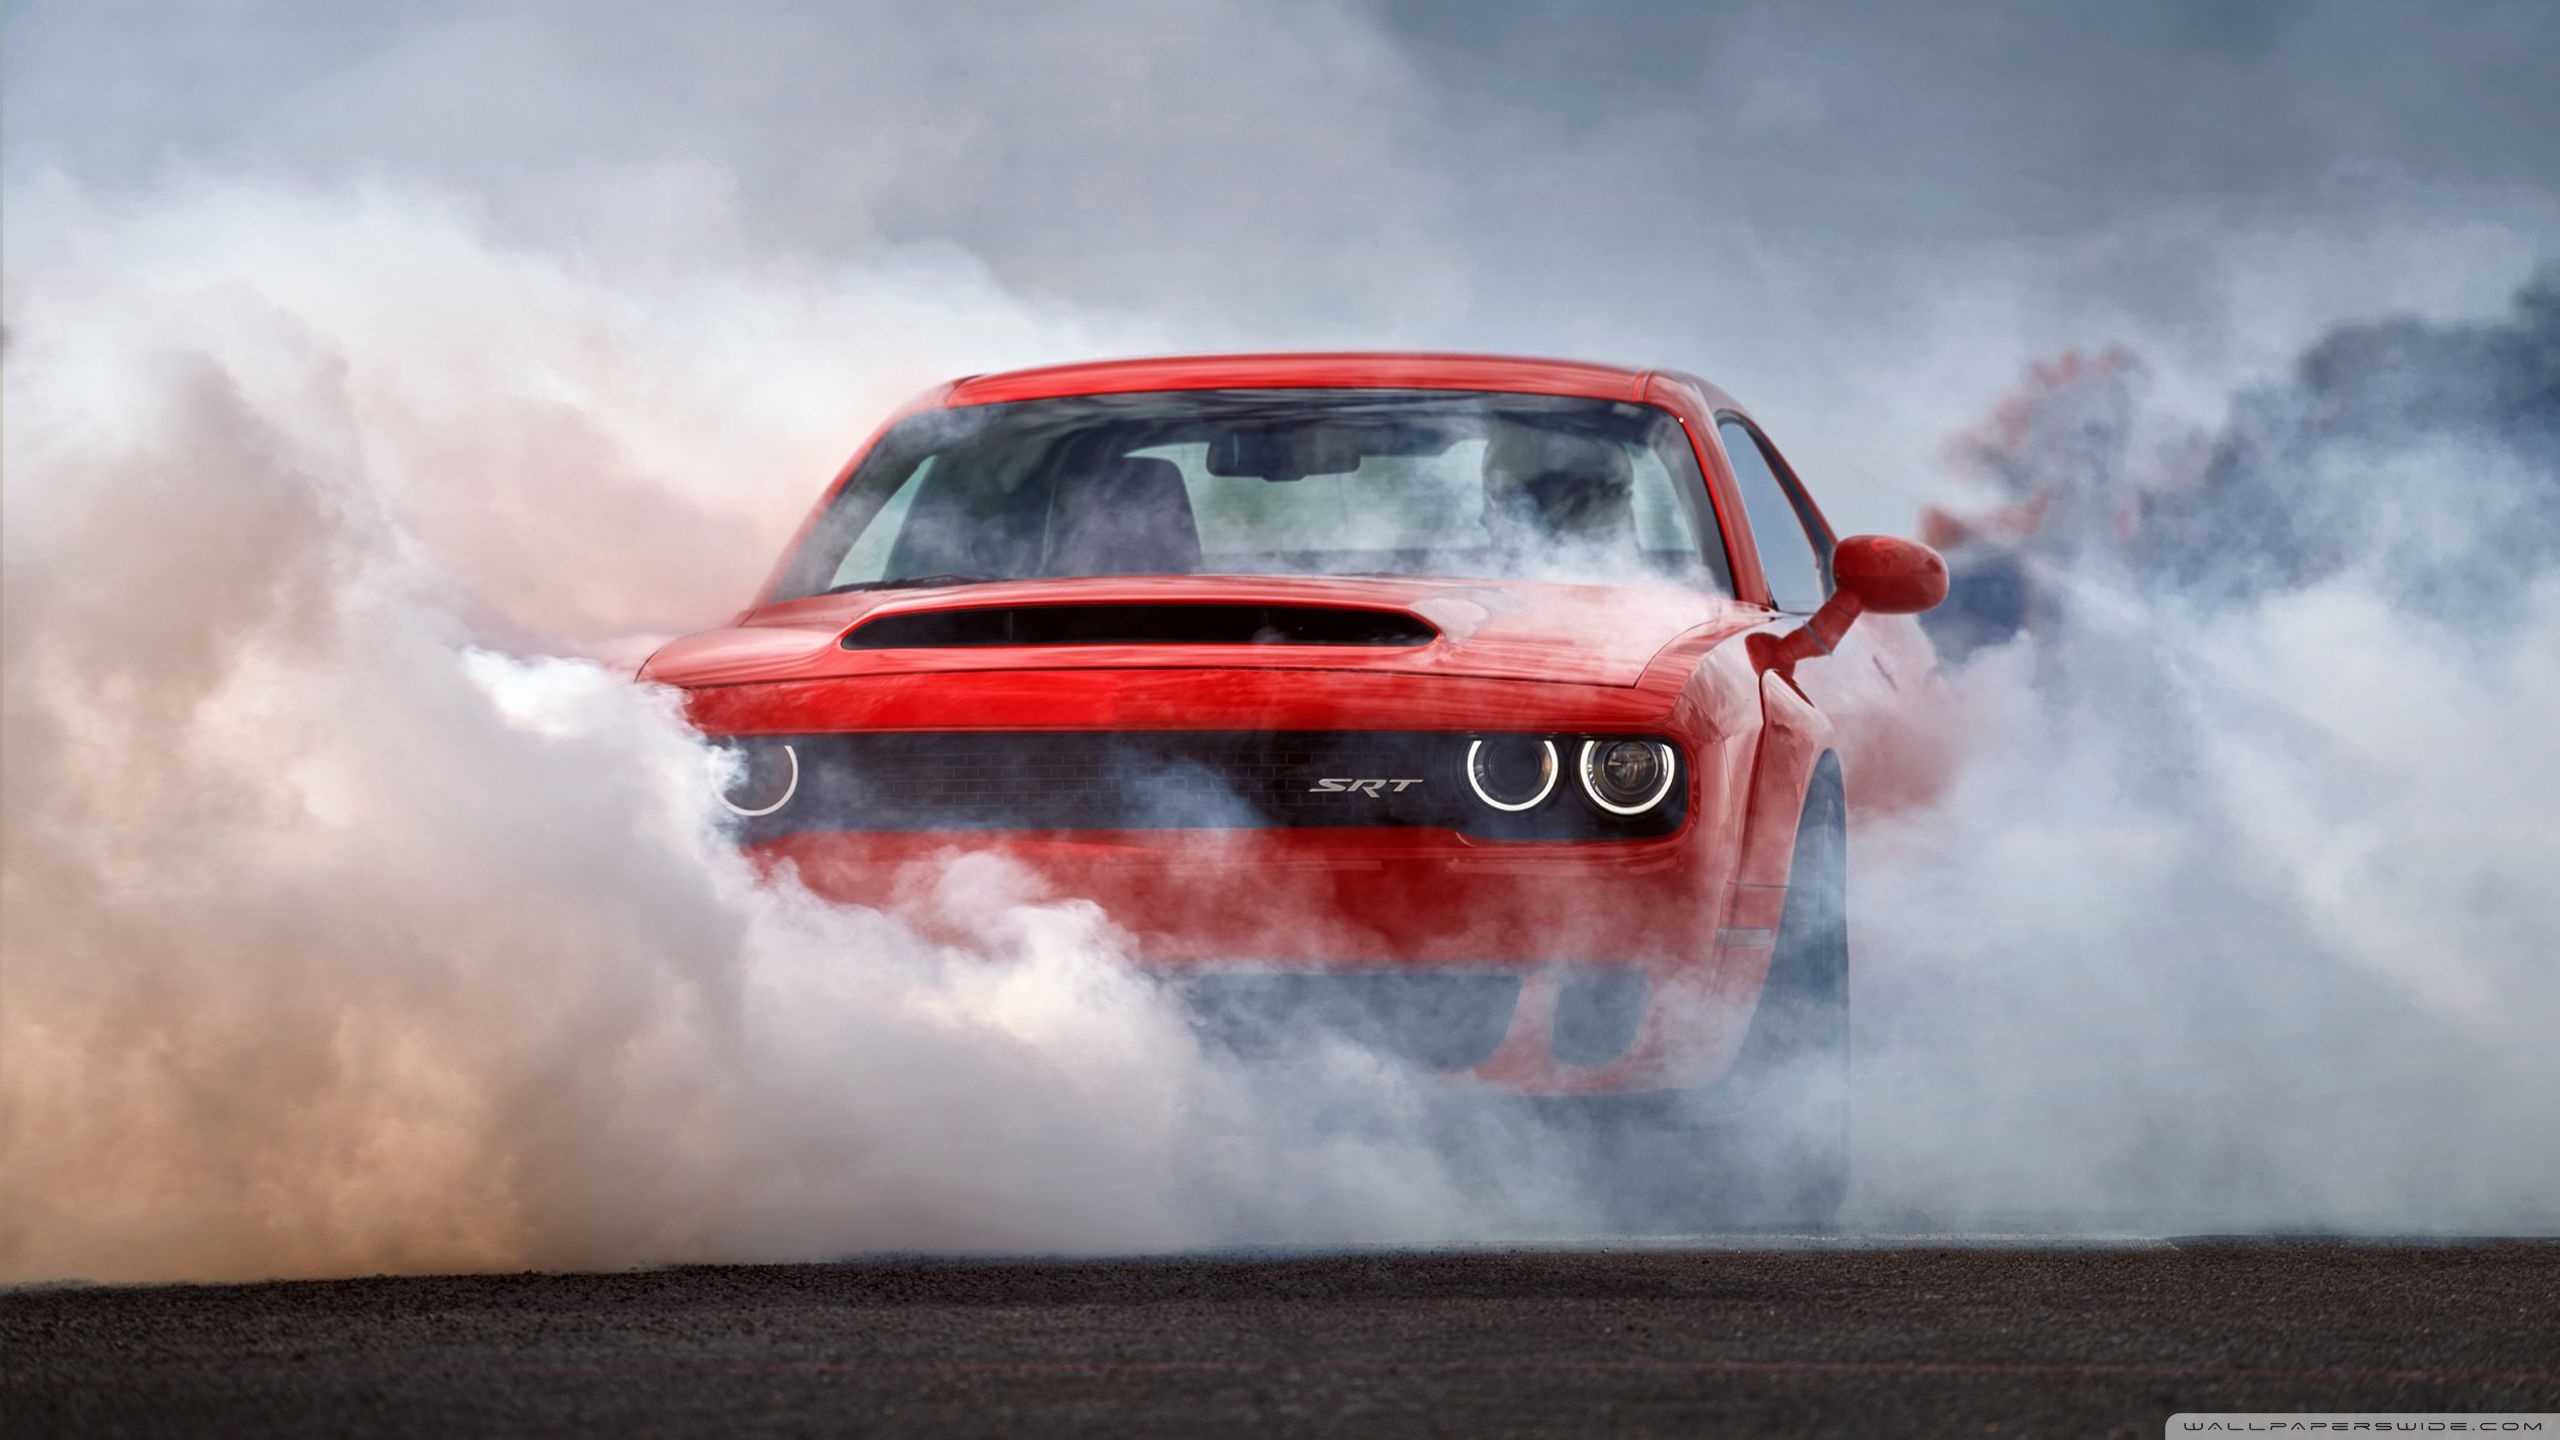 General 2560x1440 car dust smoke Dodge Challenger burnout muscle cars red cars Dodge vehicle people American cars Stellantis